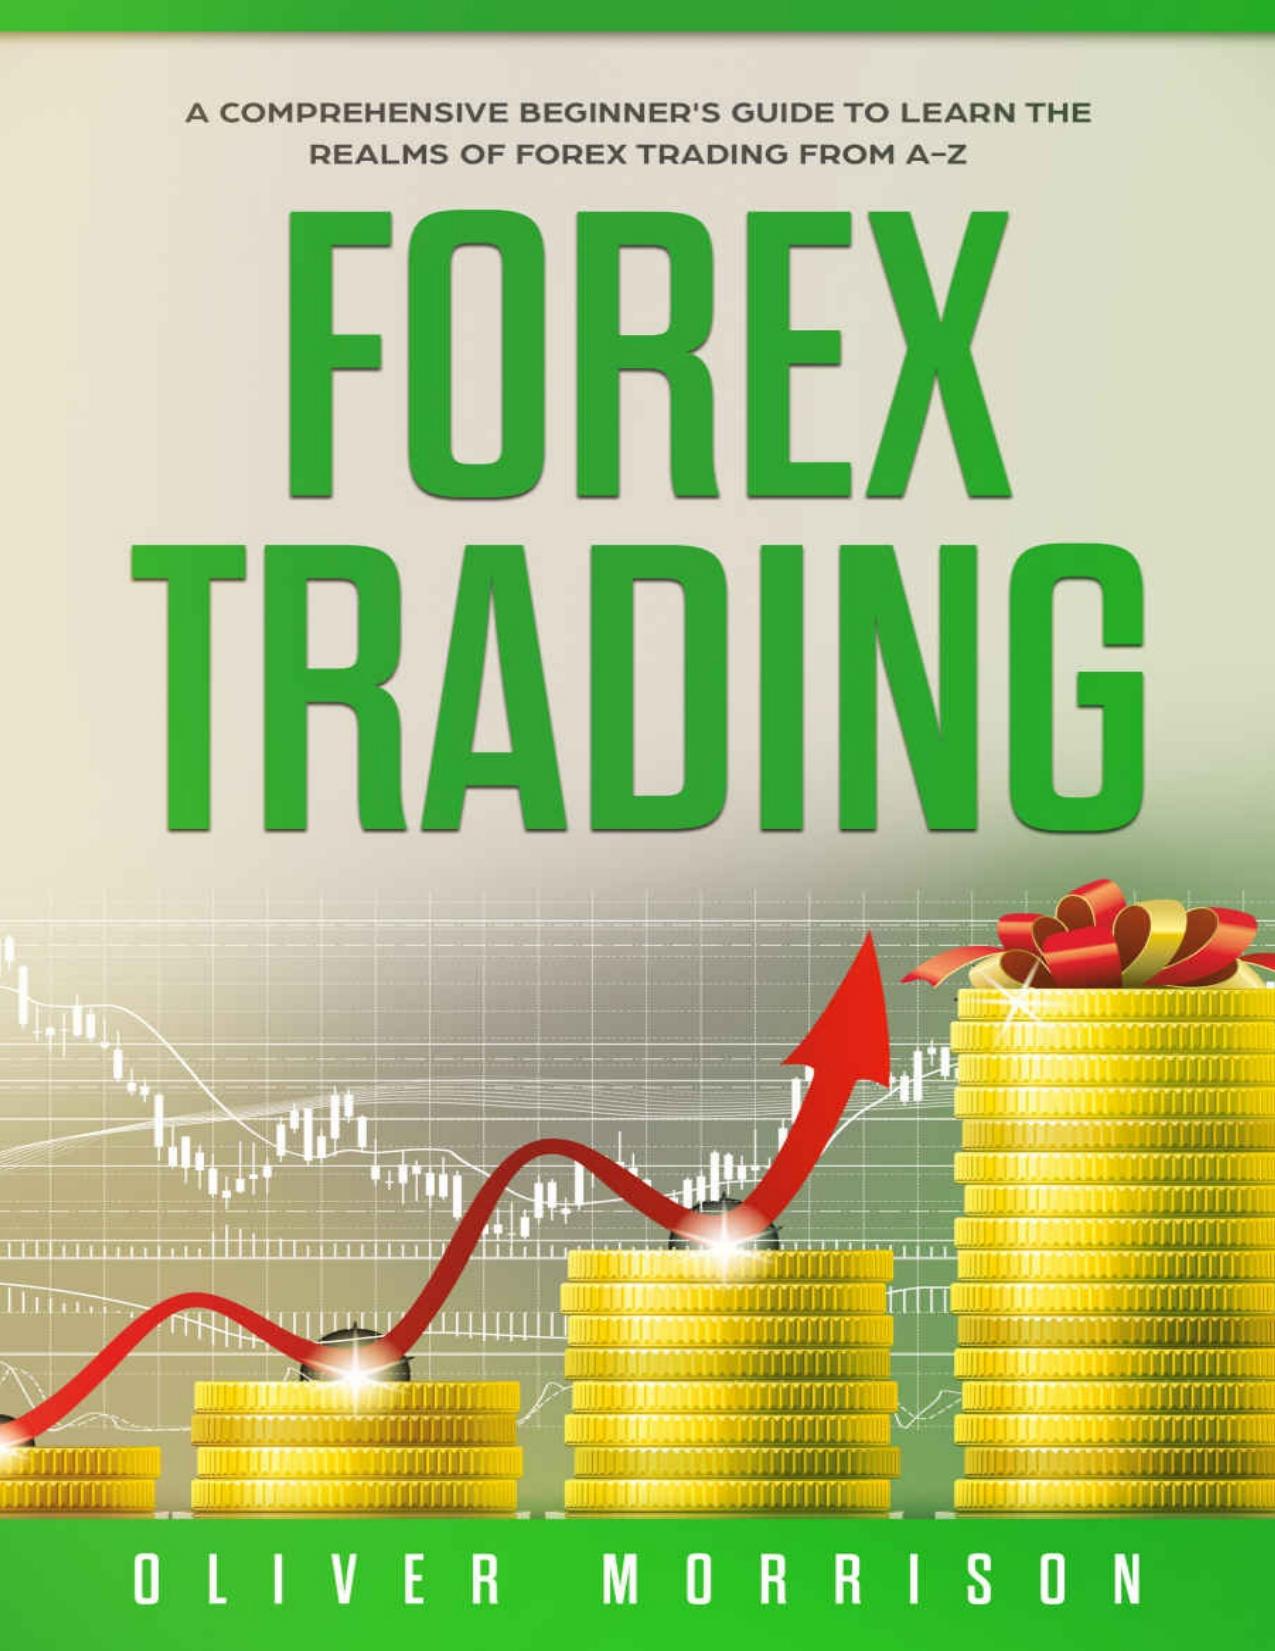 Forex Trading: A Comprehensive beginner’s guide to learn the realms of Forex trading from A-Z